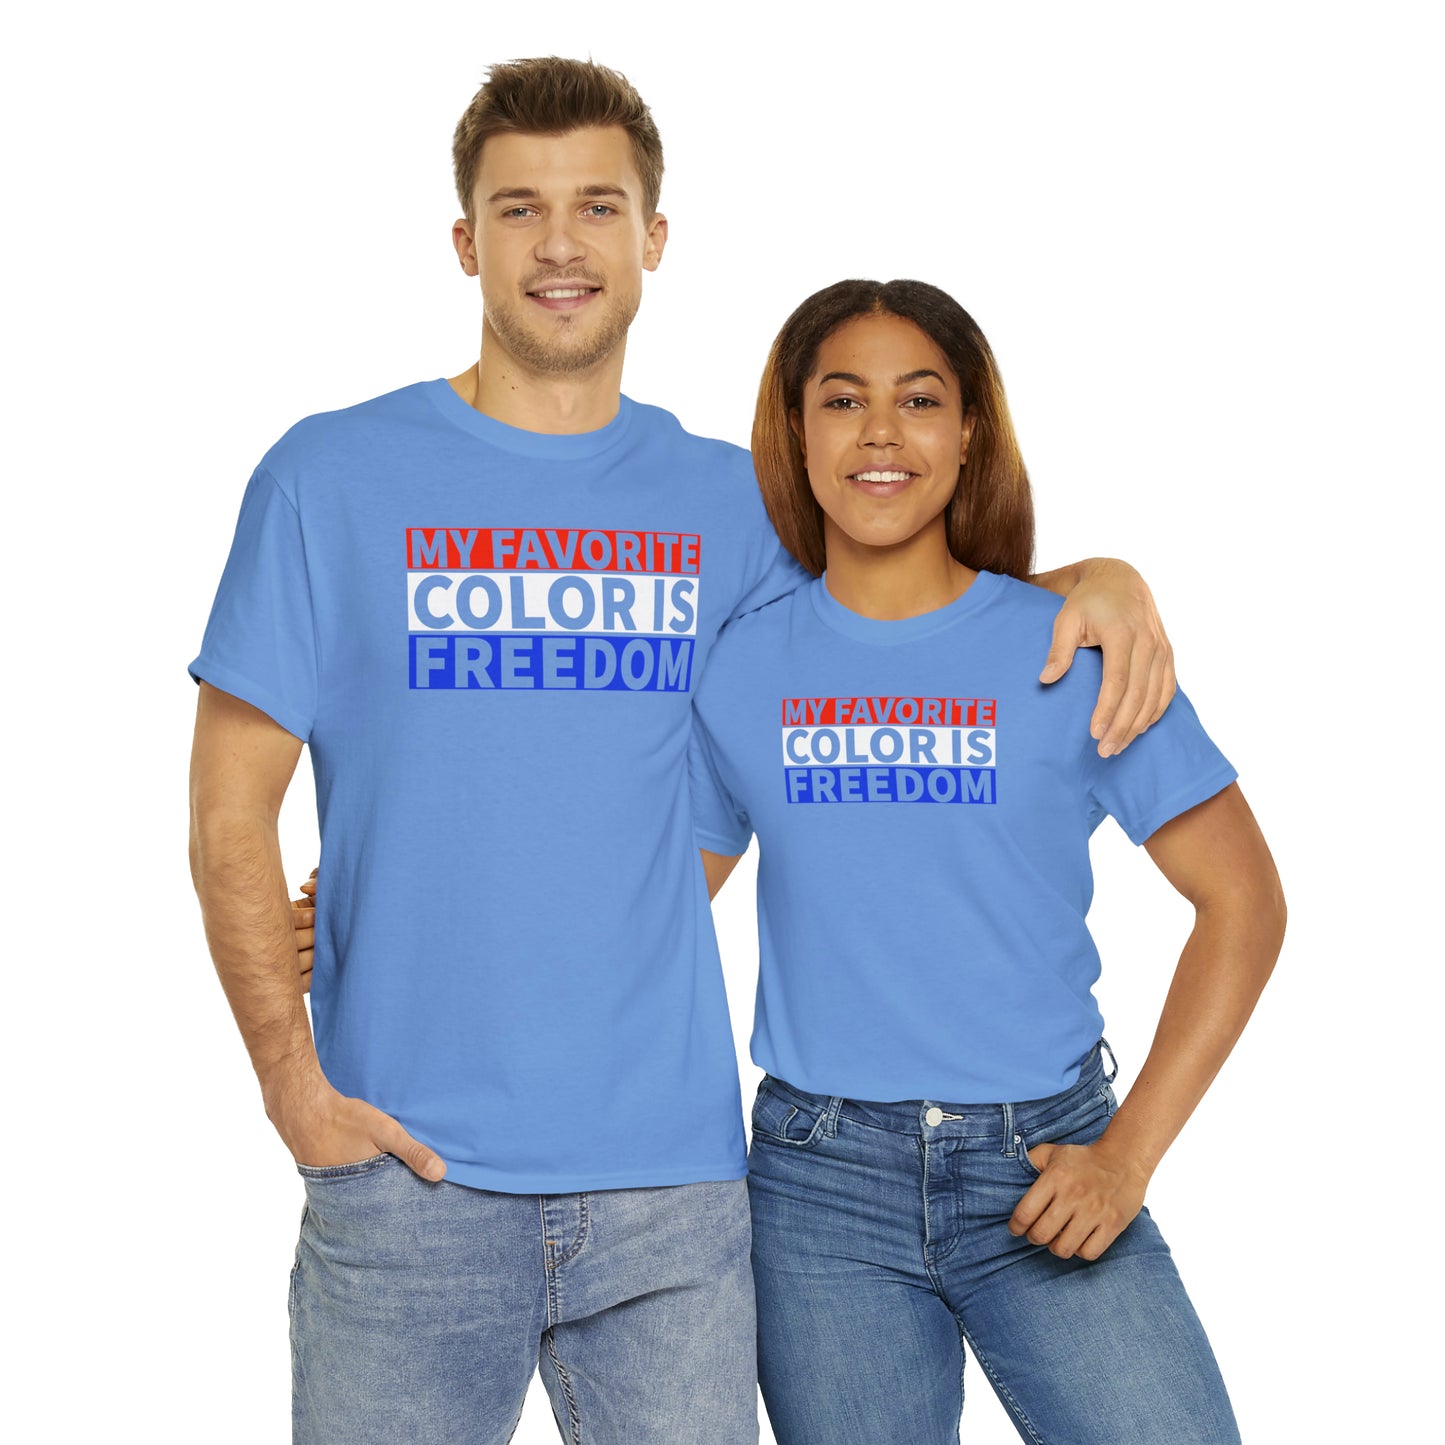 Freedom T-Shirt For Conservative TShirt For Patriot T Shirt For Independence Day Shirt For Patriotic Gift For Freedom Lover